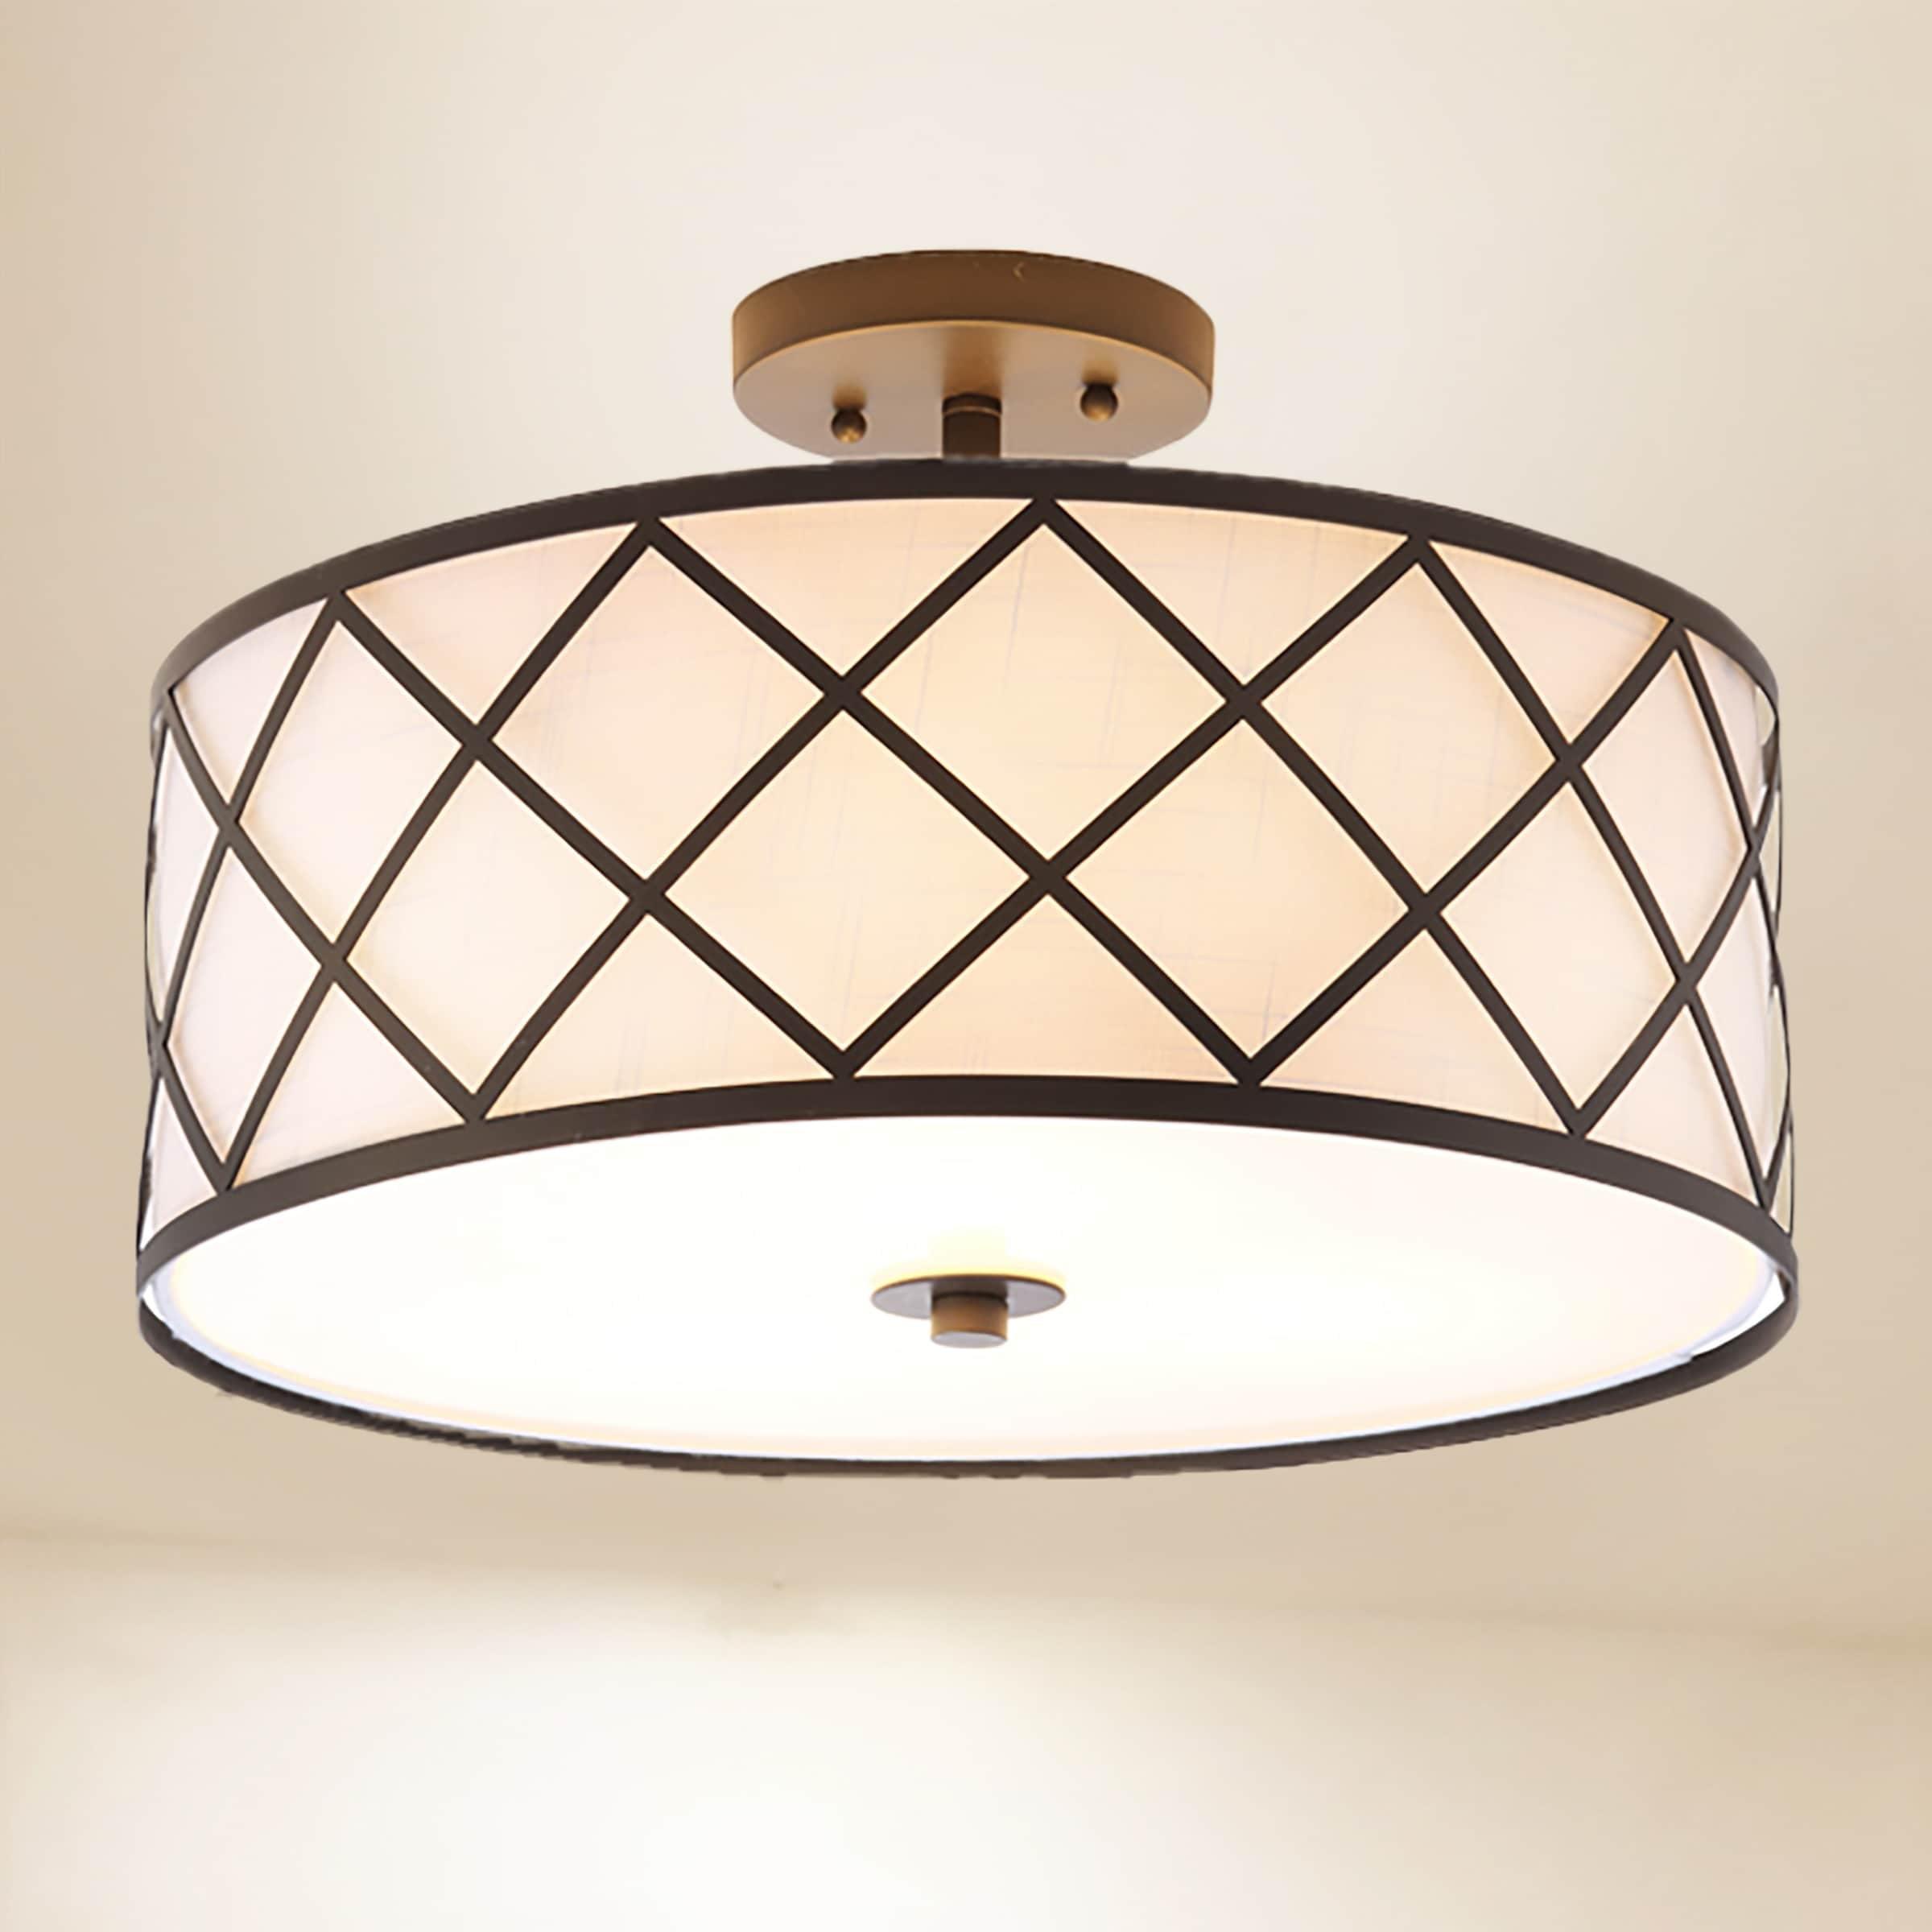 Transitional Elegance 16.75" Drum Flush Mount in Oil Rubbed Bronze with White Linen Shade